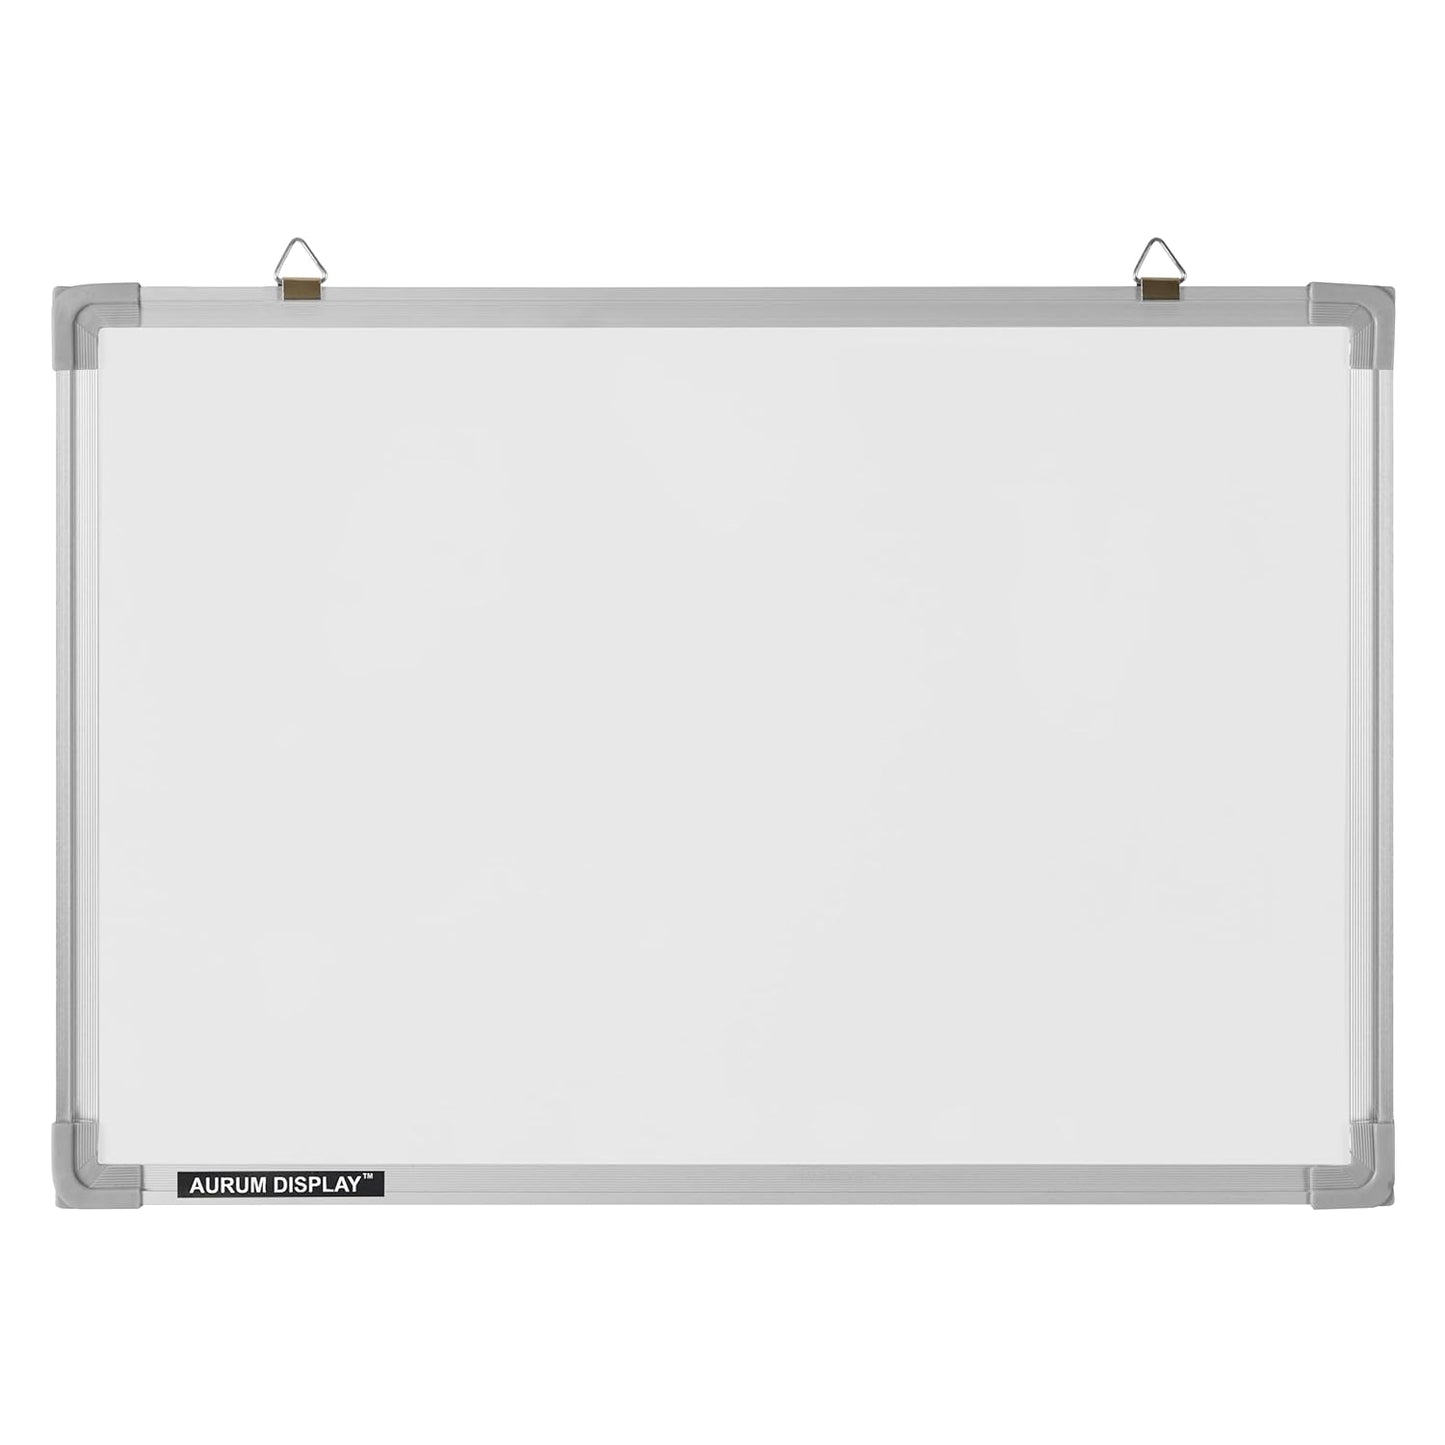 Digismart Board Whiteboard Classic Channel for Office, Home & School Aluminum Frame (Pack of 1) (Non Magnetic)